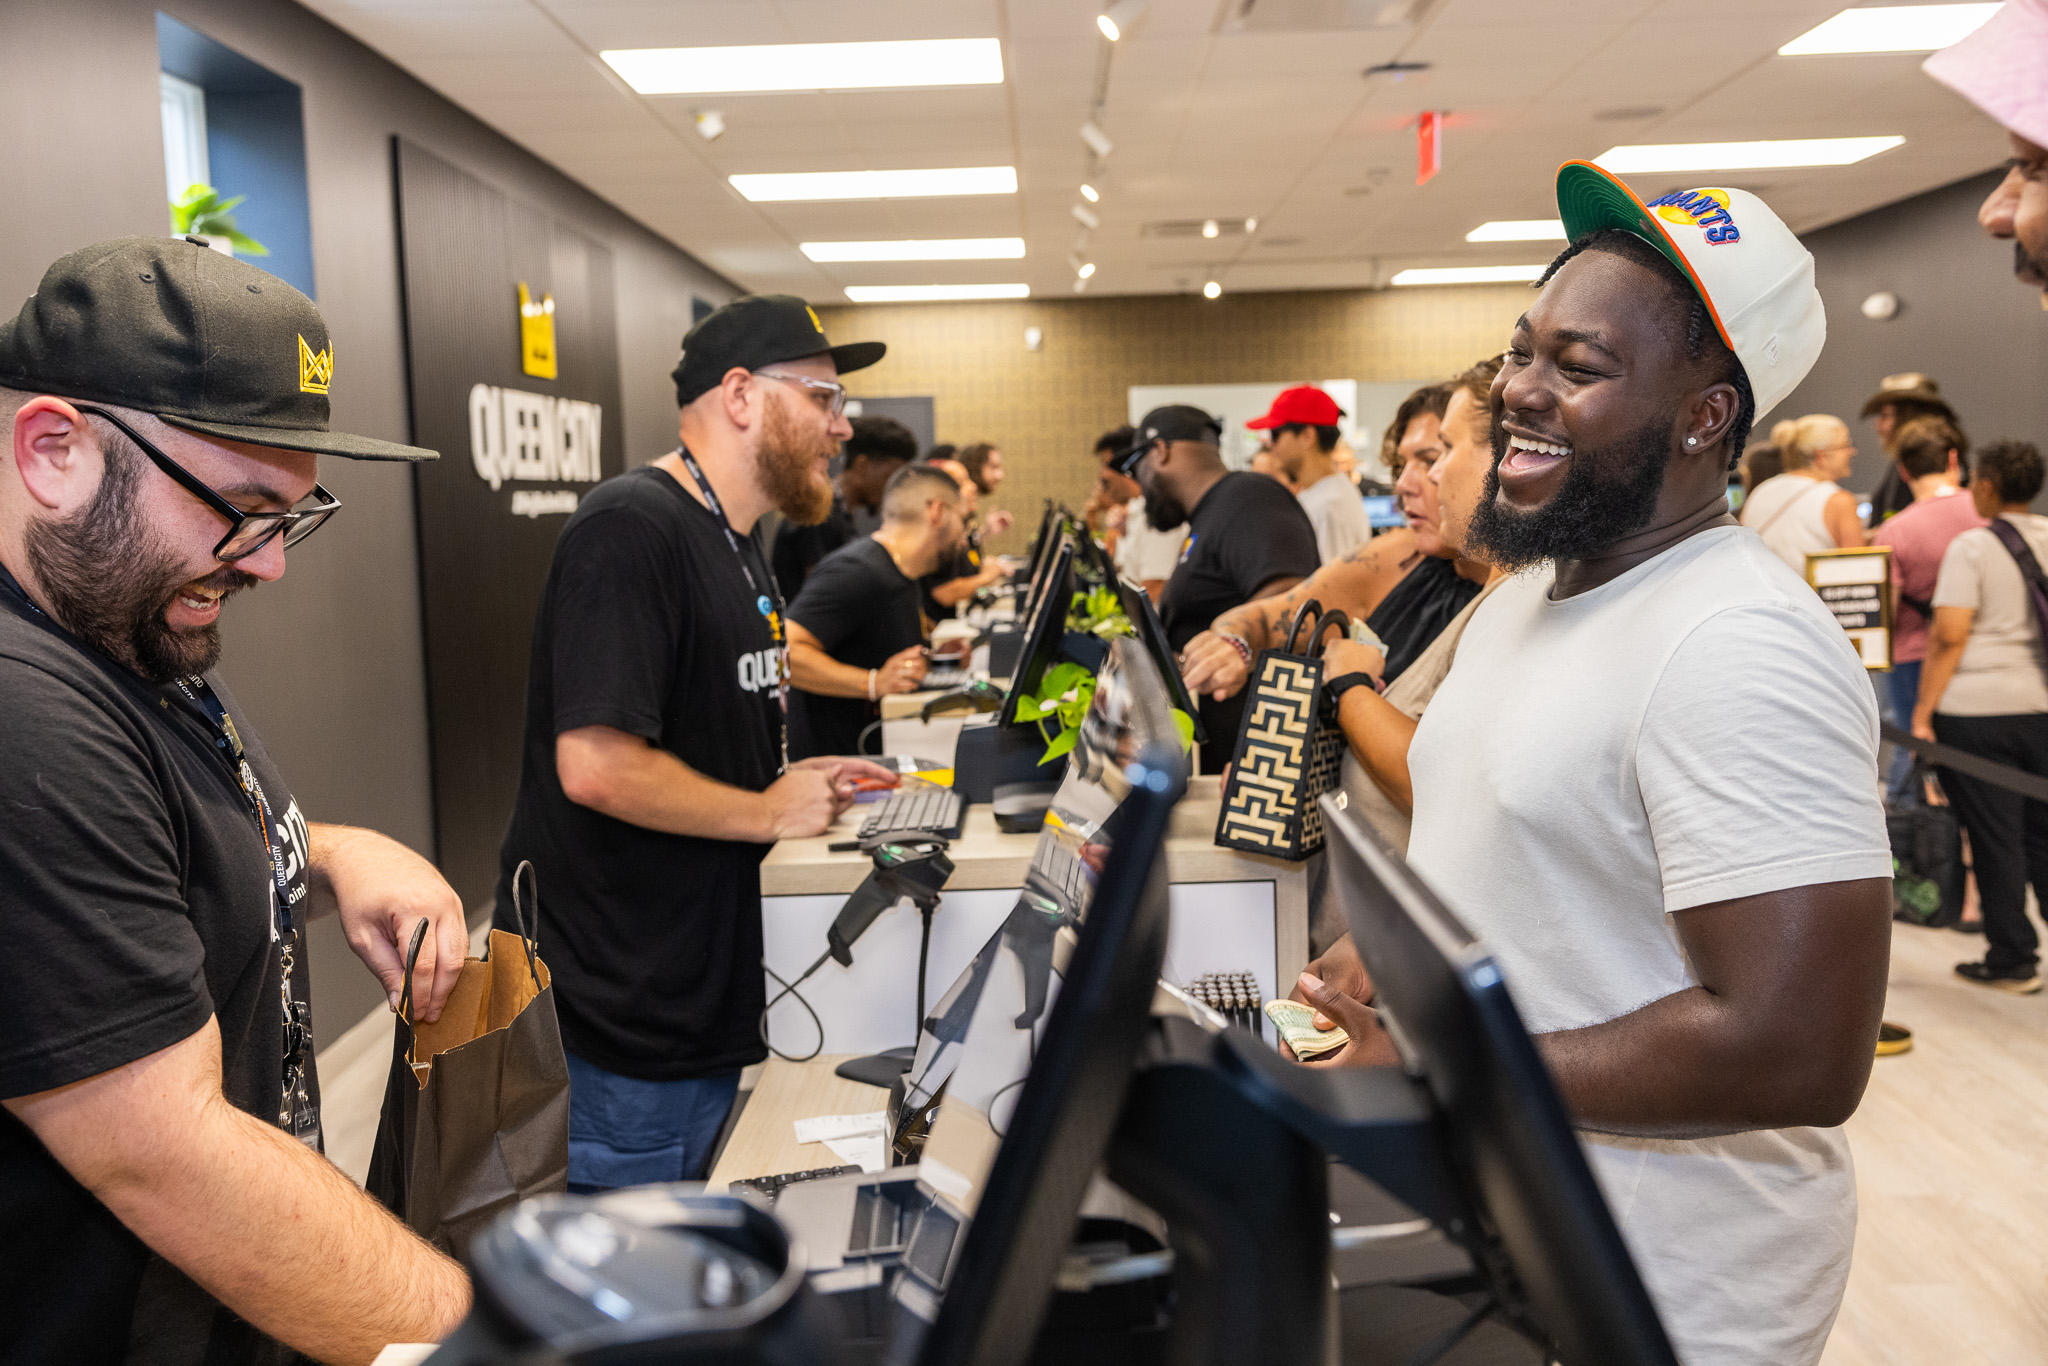 A customer and budtender converse at checkout. The customer on the right is wearing a white T-shirt and hat. The budtender on the left is wearing Queen City gear. Everyone is smiling and laughing, indicating a great experience at a New Jersey recreational weed shop.